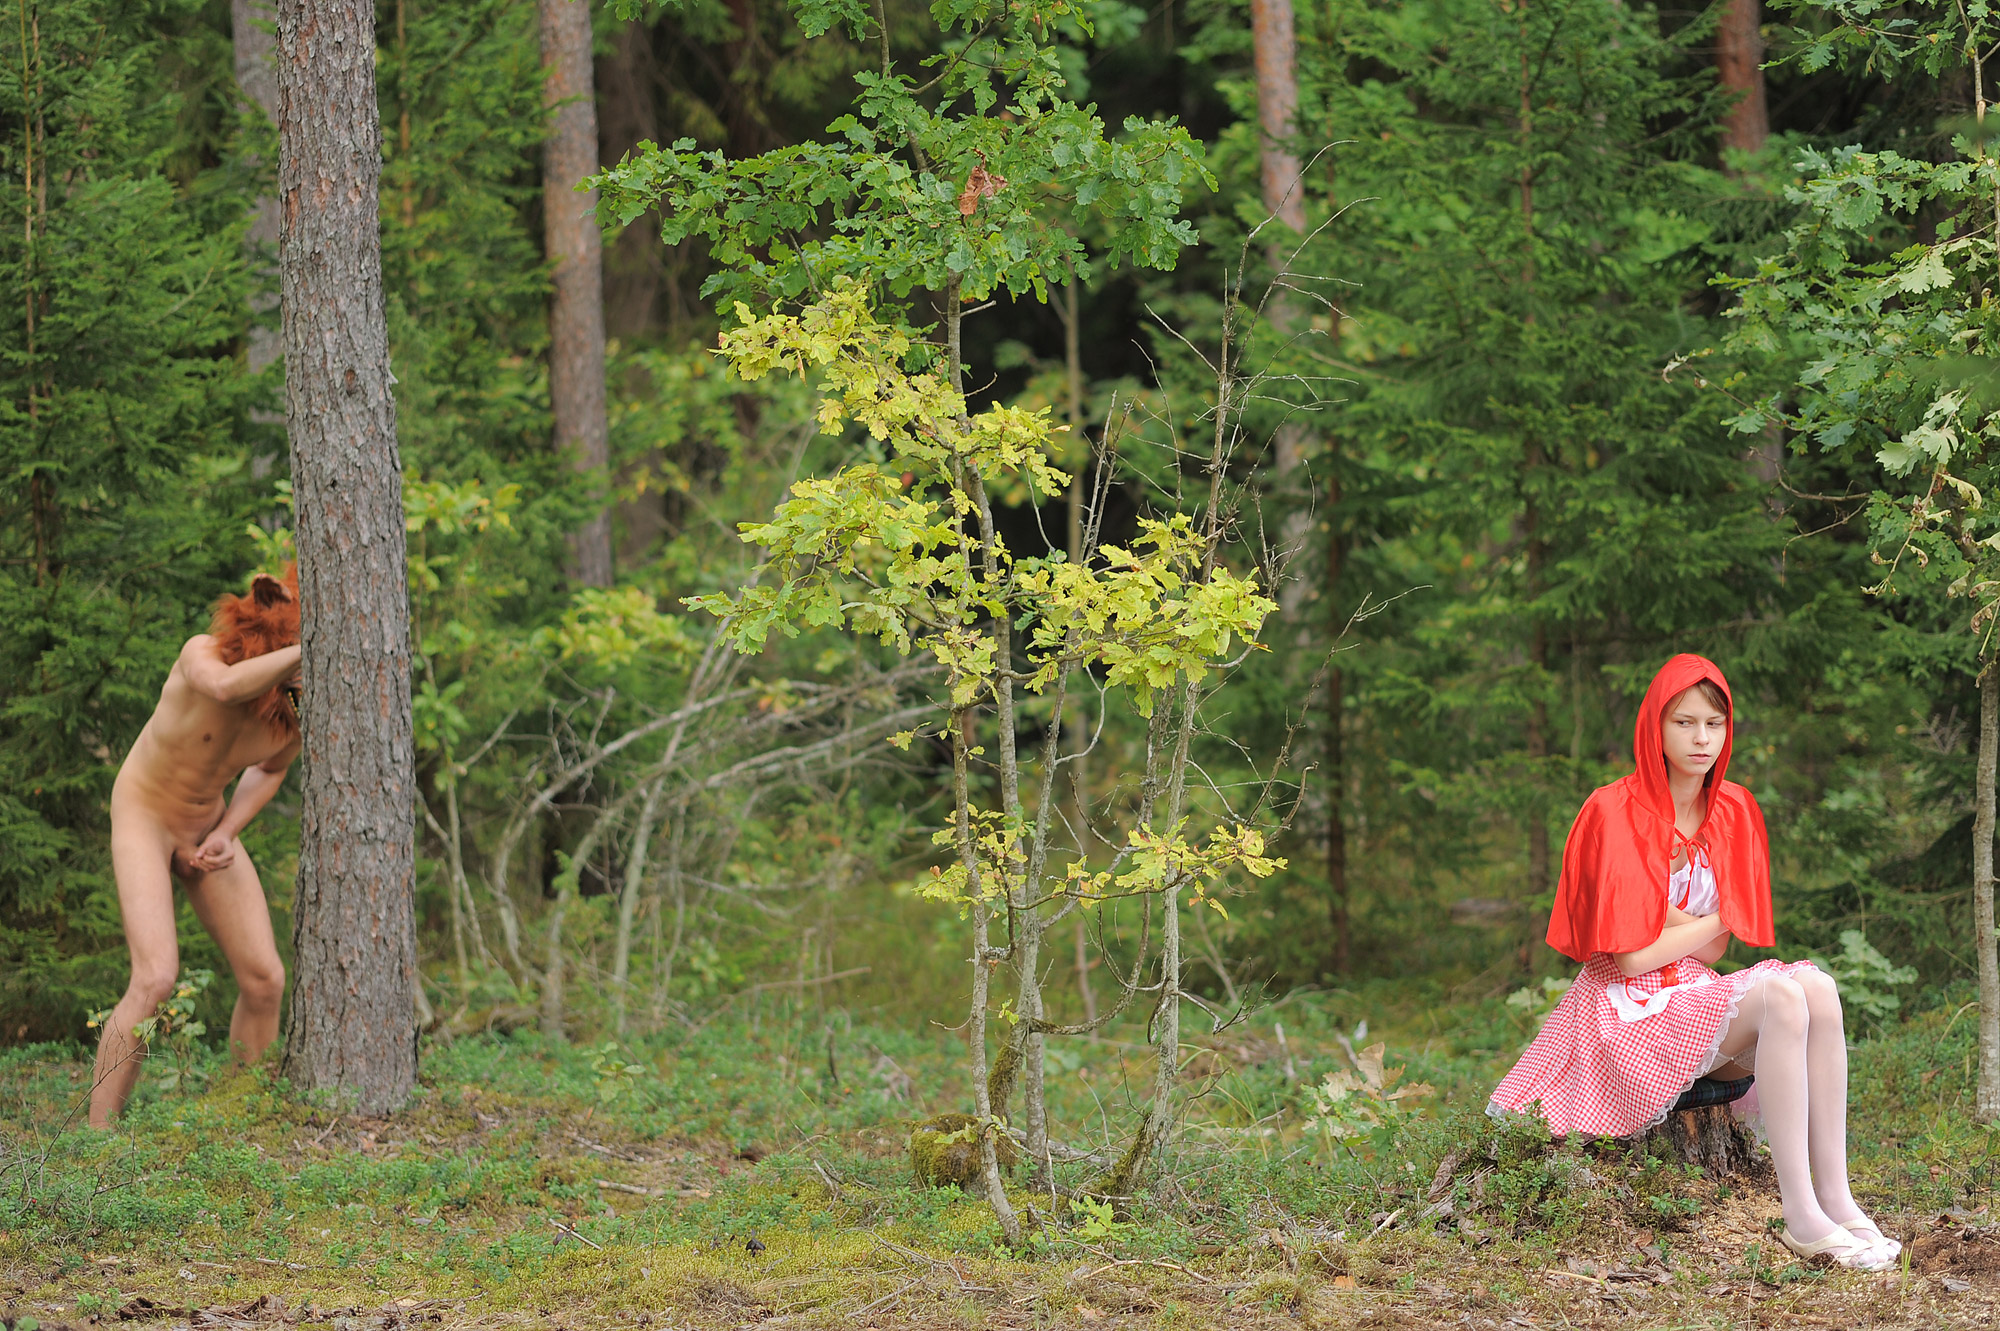 Pure and naked little red riding hood lost in the woods